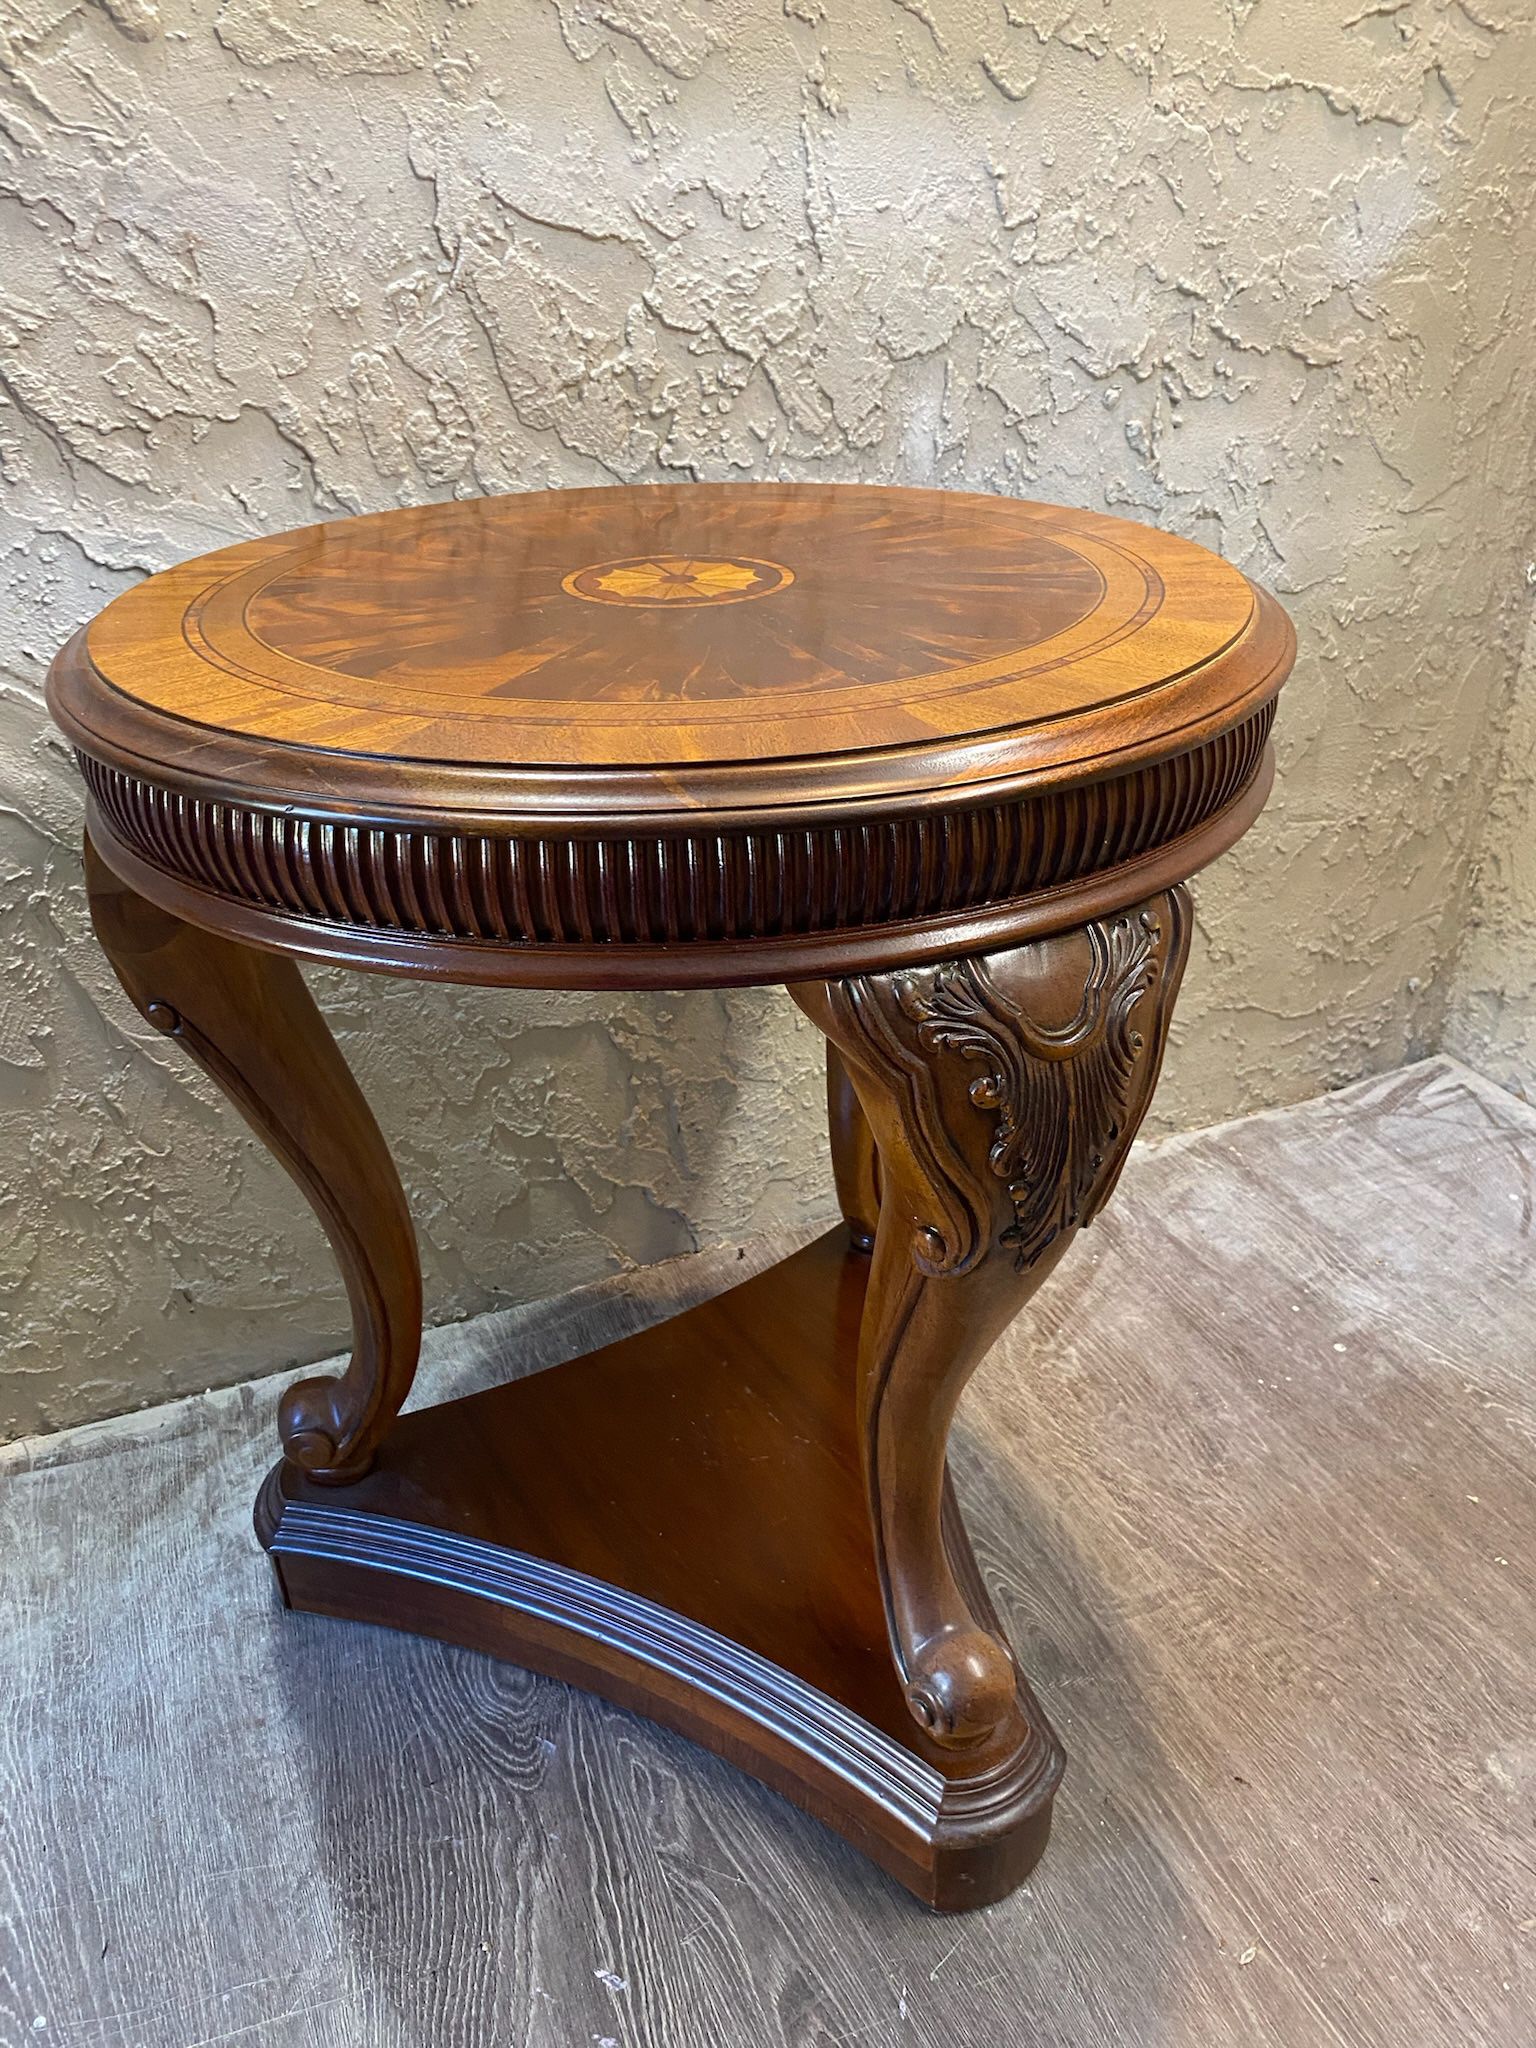 Round Solid Wood Coffee Table, Accent Sofa Table Coffee End Tables Bedside Table - See My Other Items 😃